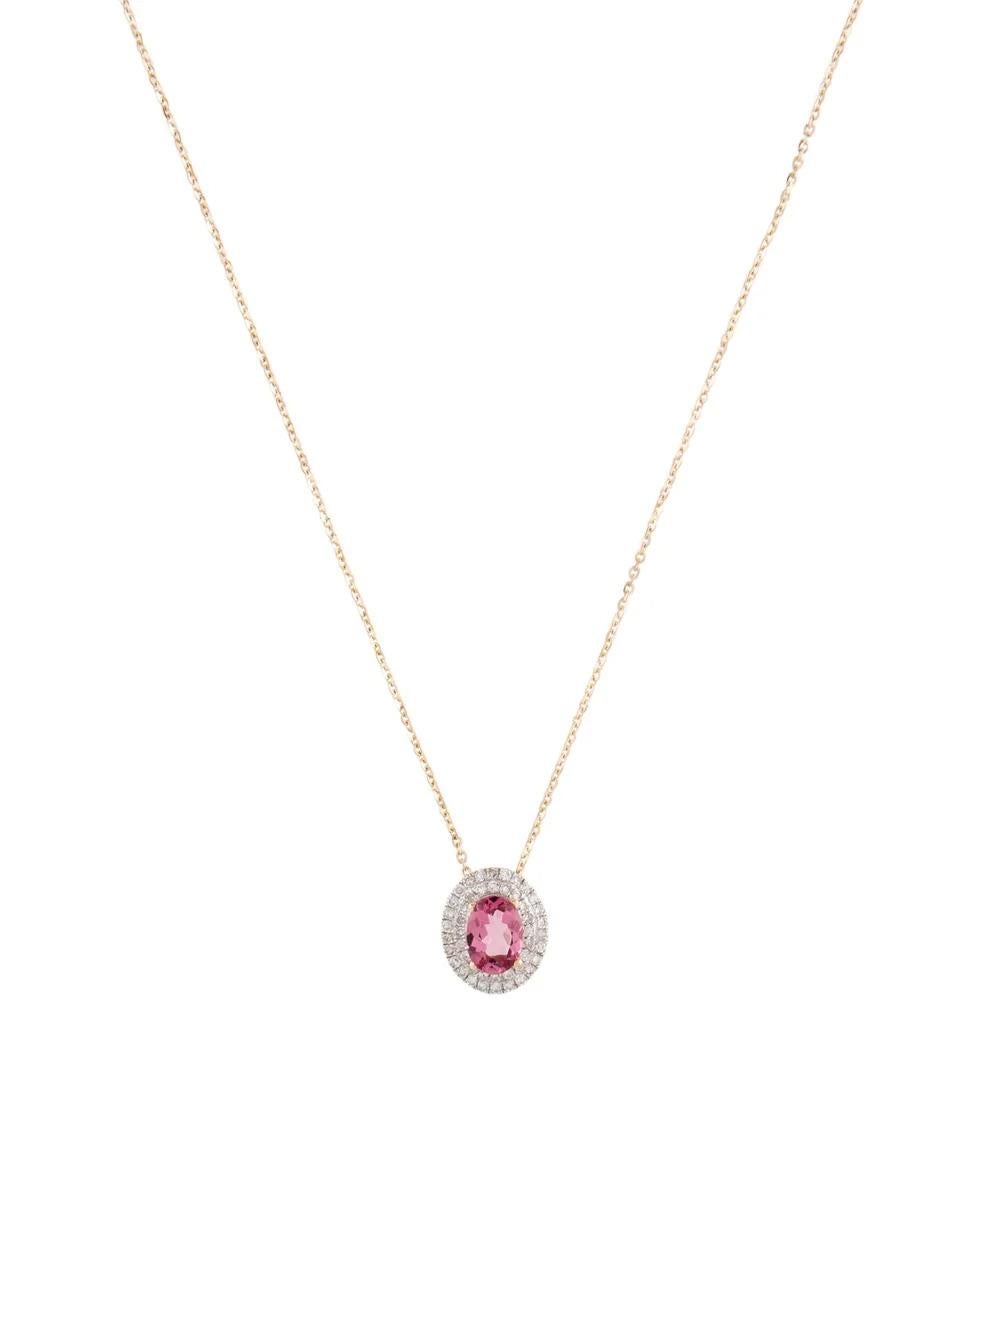 Indulge in timeless elegance with this exquisite 14K Yellow Gold Necklace, adorned with a captivating Oval Modified Brilliant Tourmaline and dazzling Diamonds. Crafted to perfection, this necklace is a statement of sophistication and